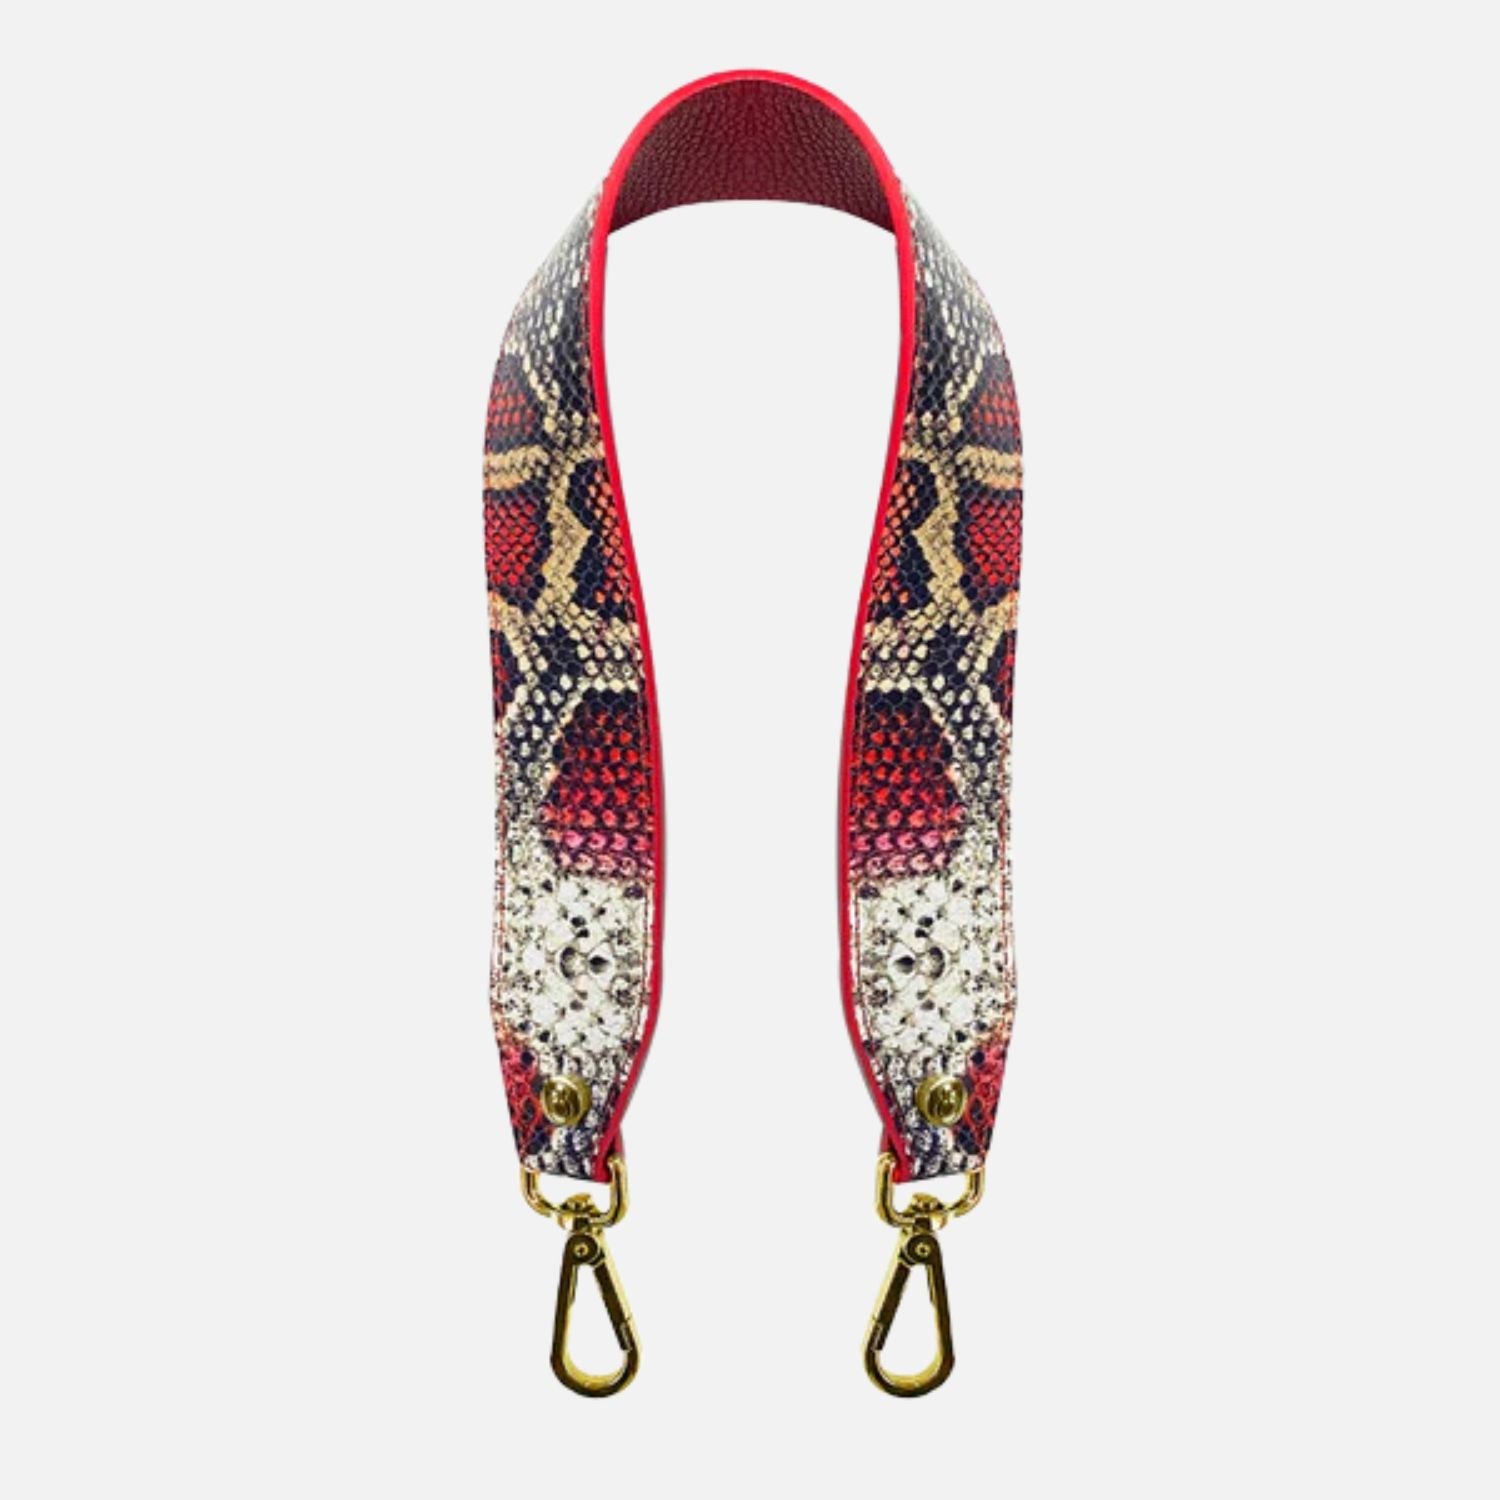 Gold Shoulder Strap – 60 cm – Cherry Shaded Python Printed Leather